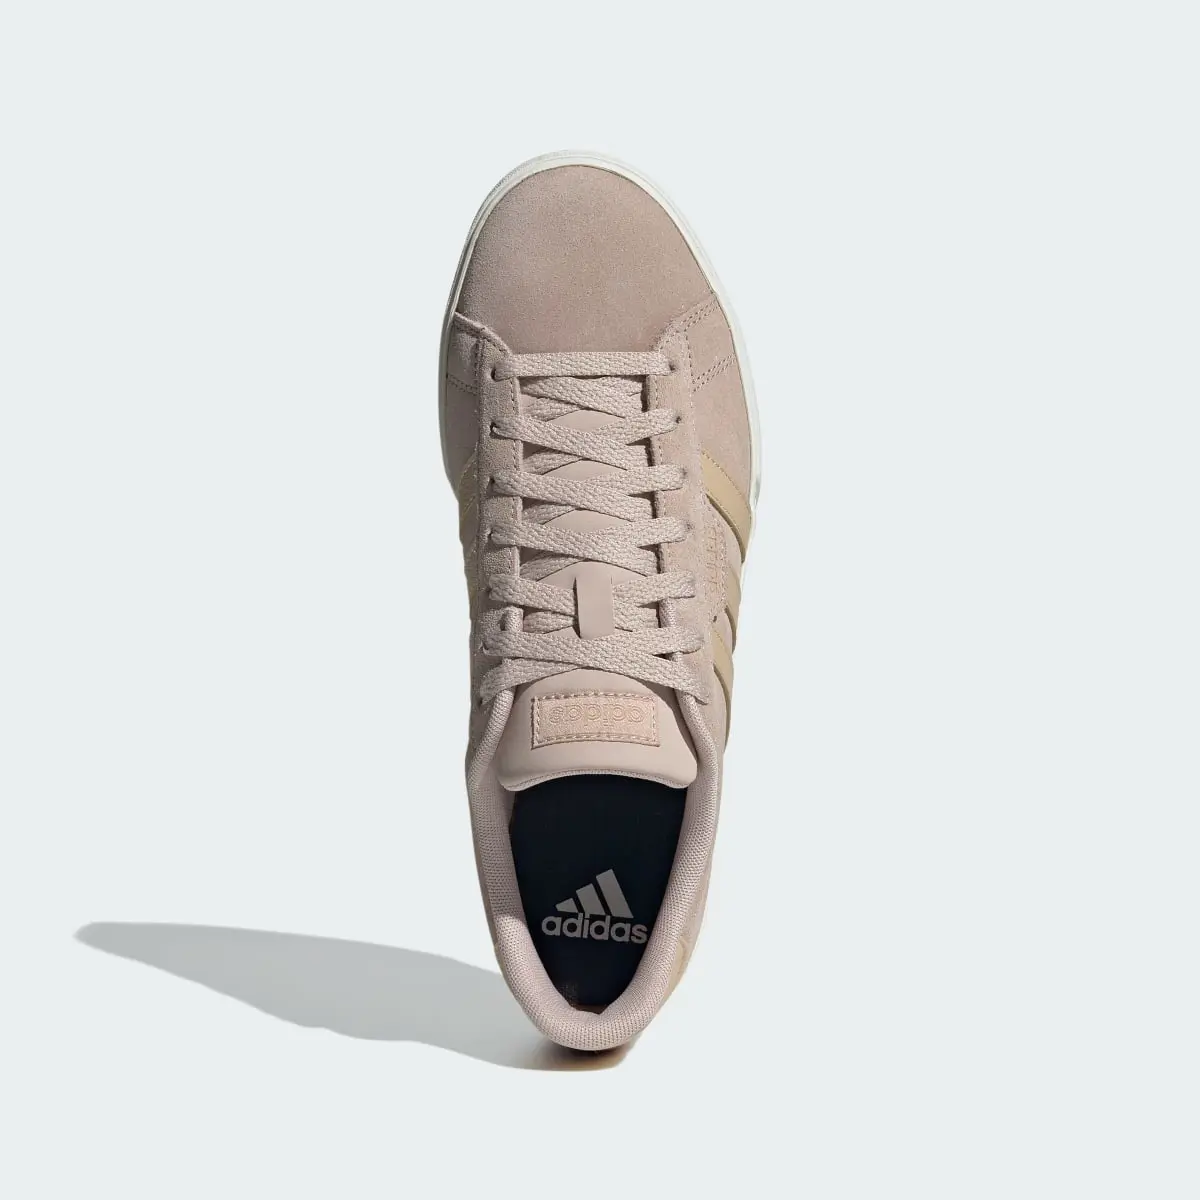 Adidas Daily 3.0 Shoes. 3